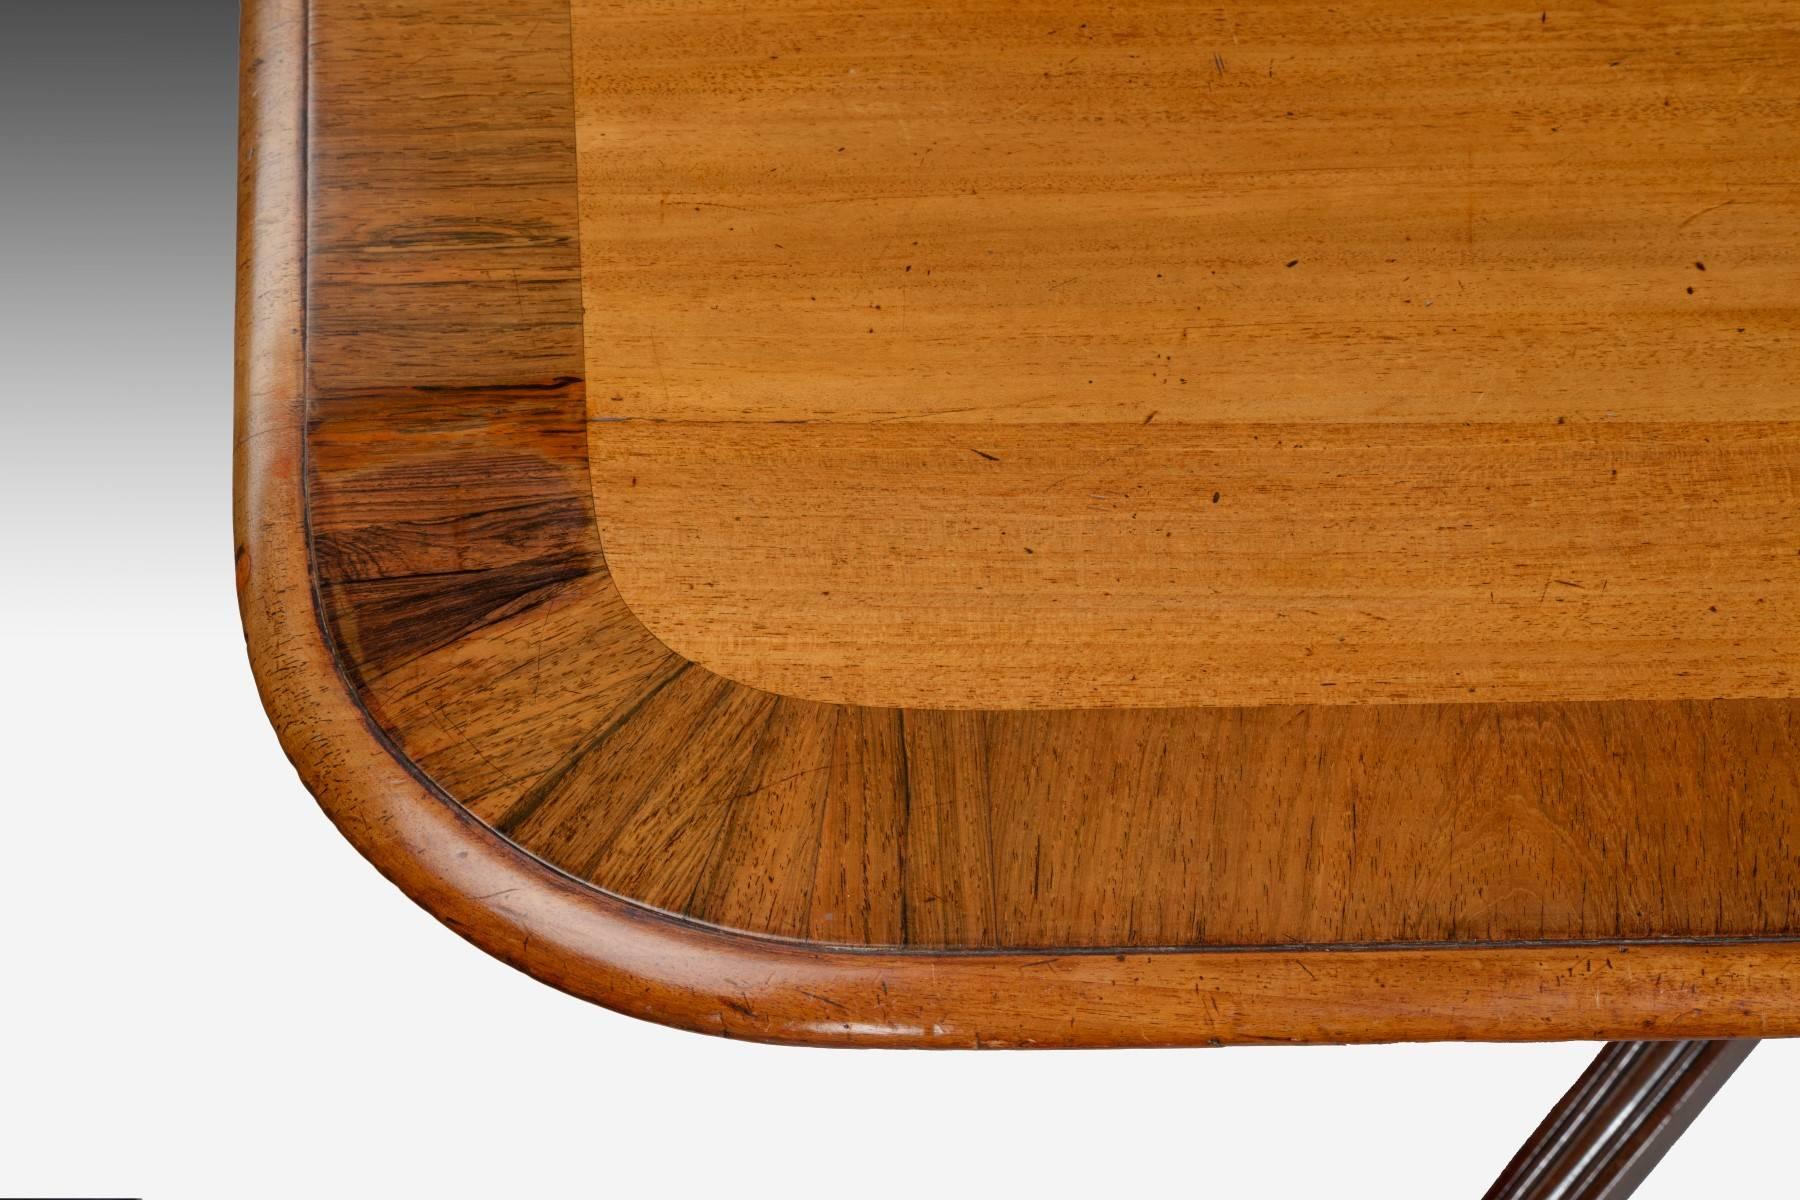 This table is made from Cuban mahogany with the top also being banded in rosewood. The well figured tilt top stands on an elegant base that has a shaped and carved knee that is typical of the work of Gillow. The quality and colour are both very good